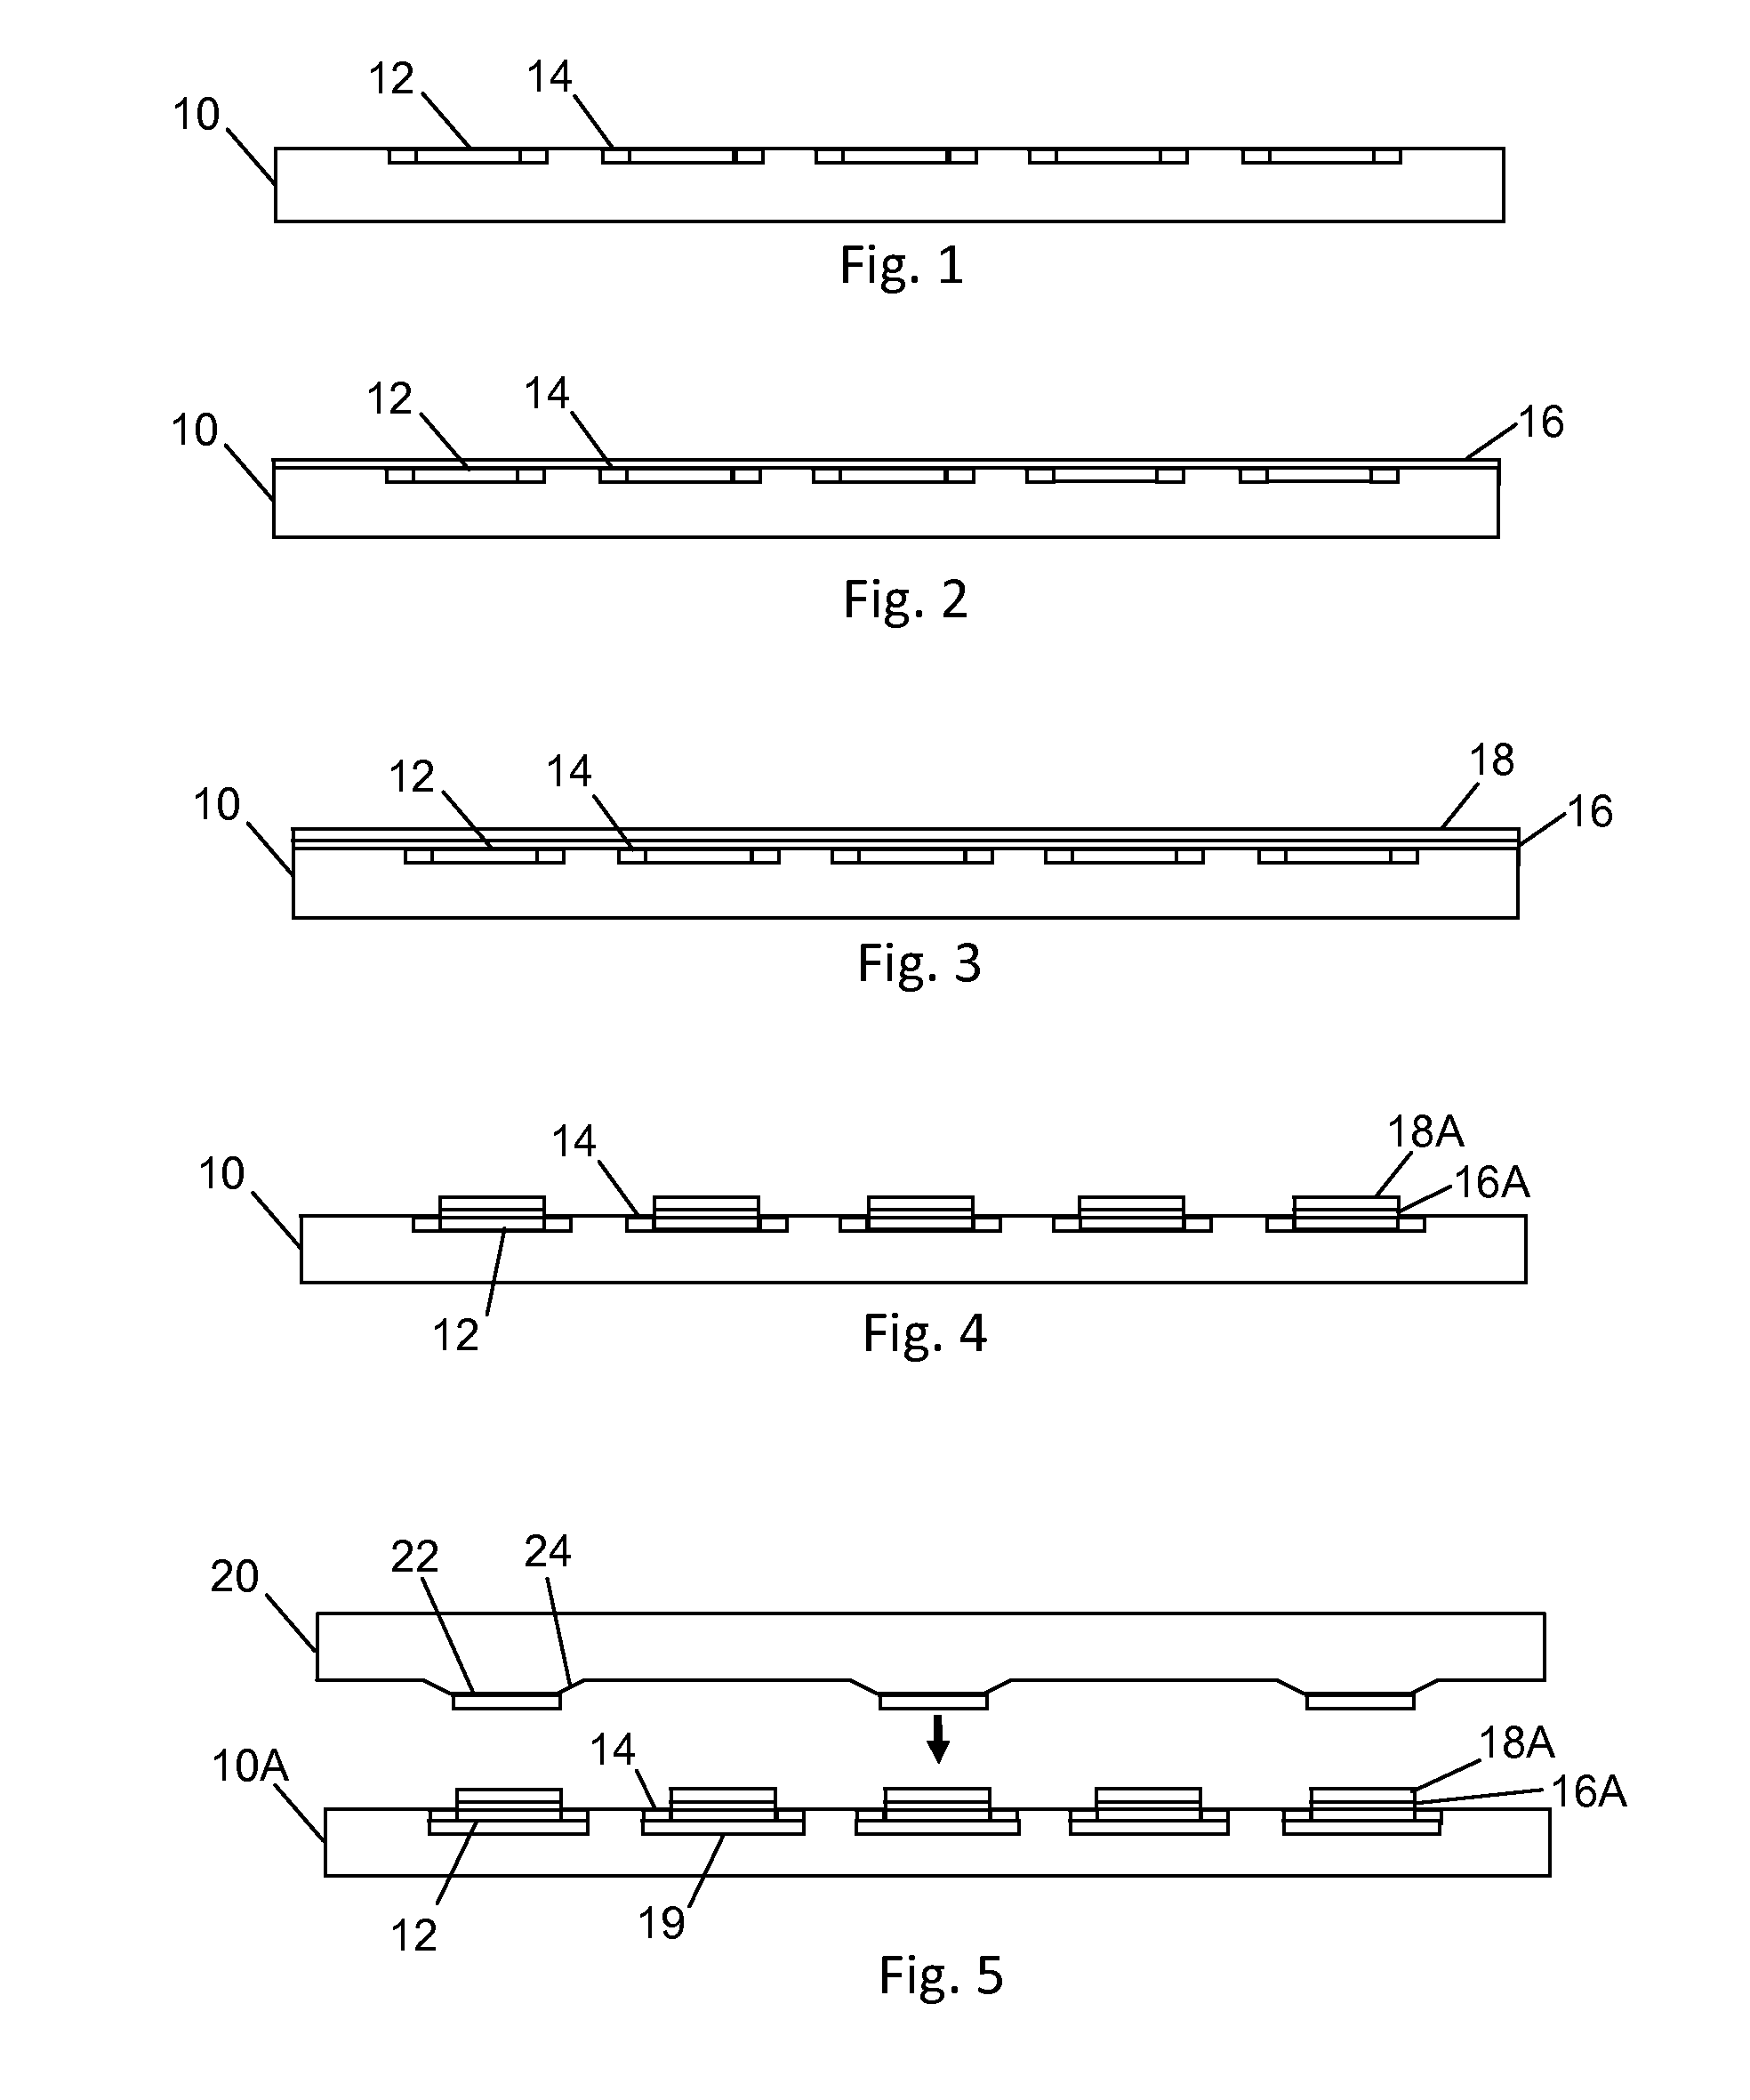 Method and magnetic transfer stamp for transferring semiconductor dice using magnetic transfer printing techniques